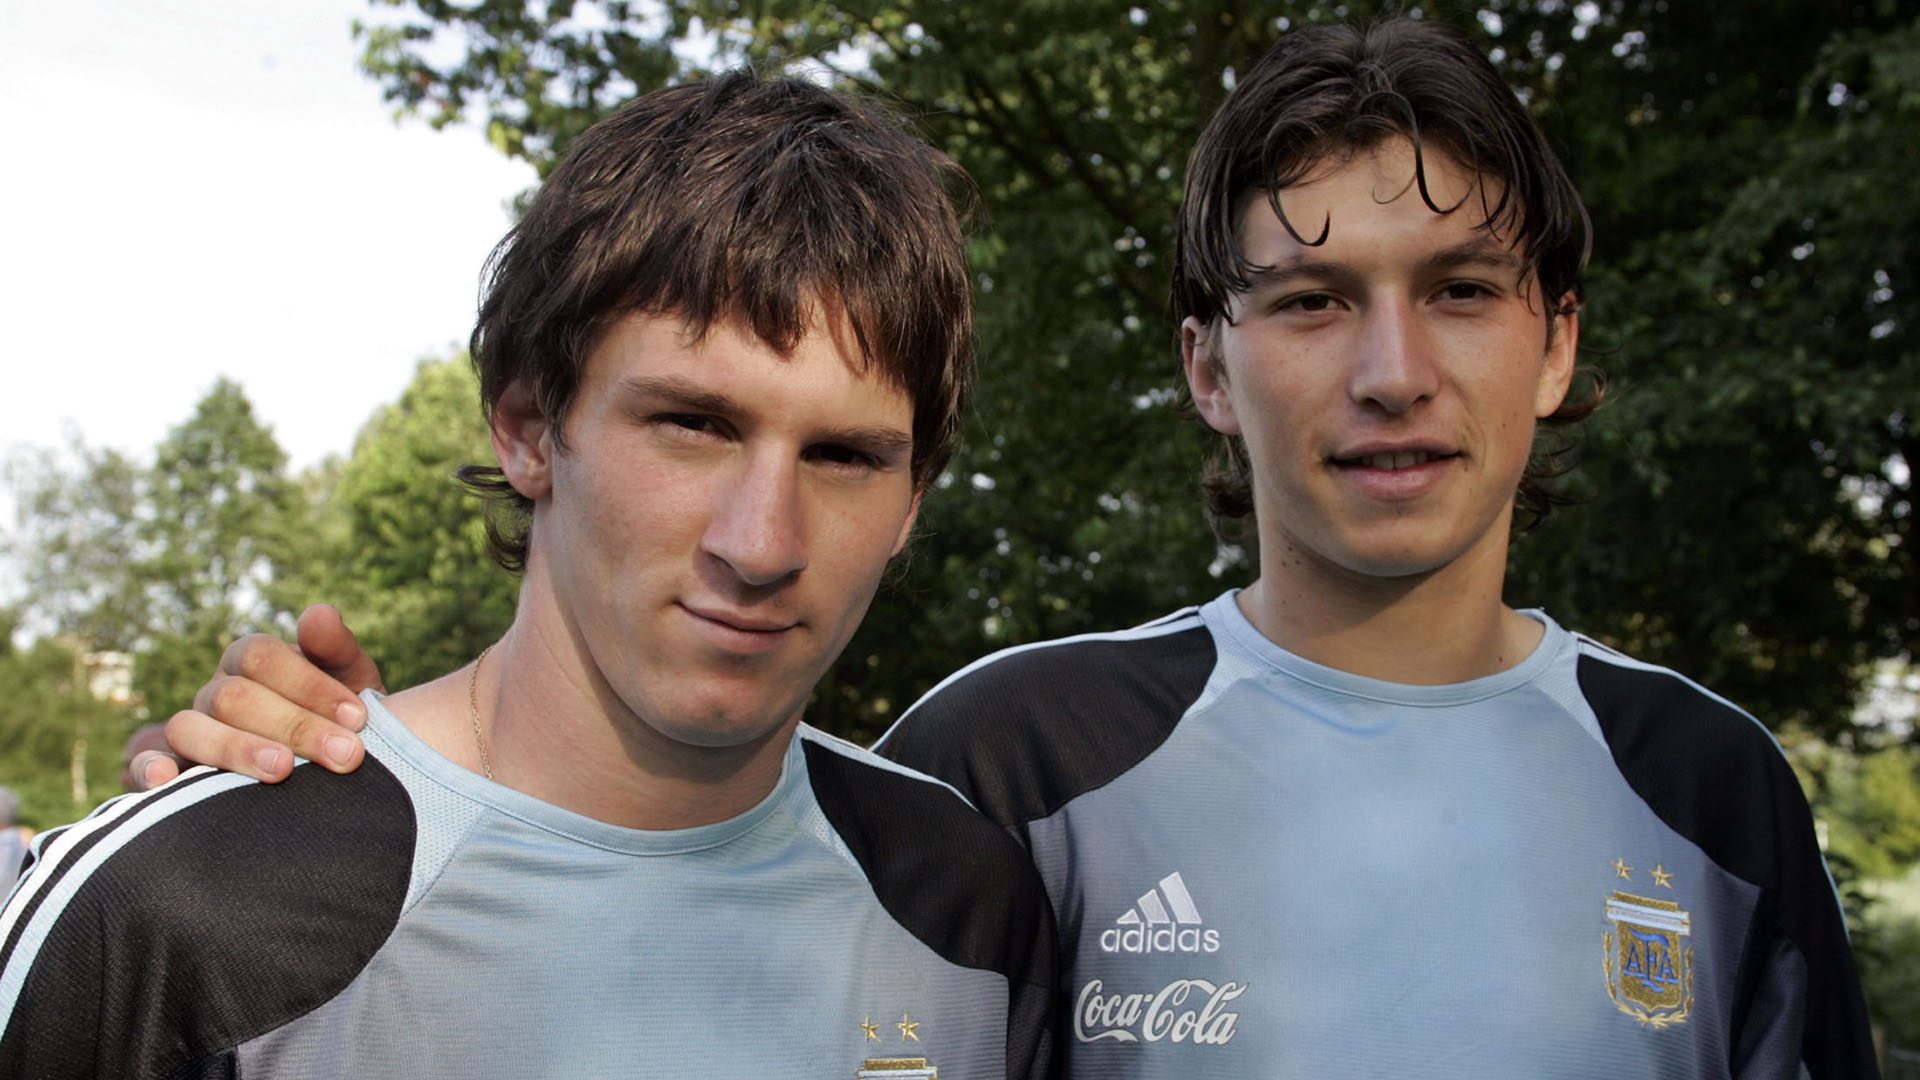 Argentina's Lionel Messi and Gustavo Ubermann (right) stand after a training session with their team at the FC de Bilt stadium in Utrecht on June 26, 2005. Argentina face Brazil on June 28 in the semi-finals of the World Youth Championship.  Photograph: Enrique Markarian/Reuters